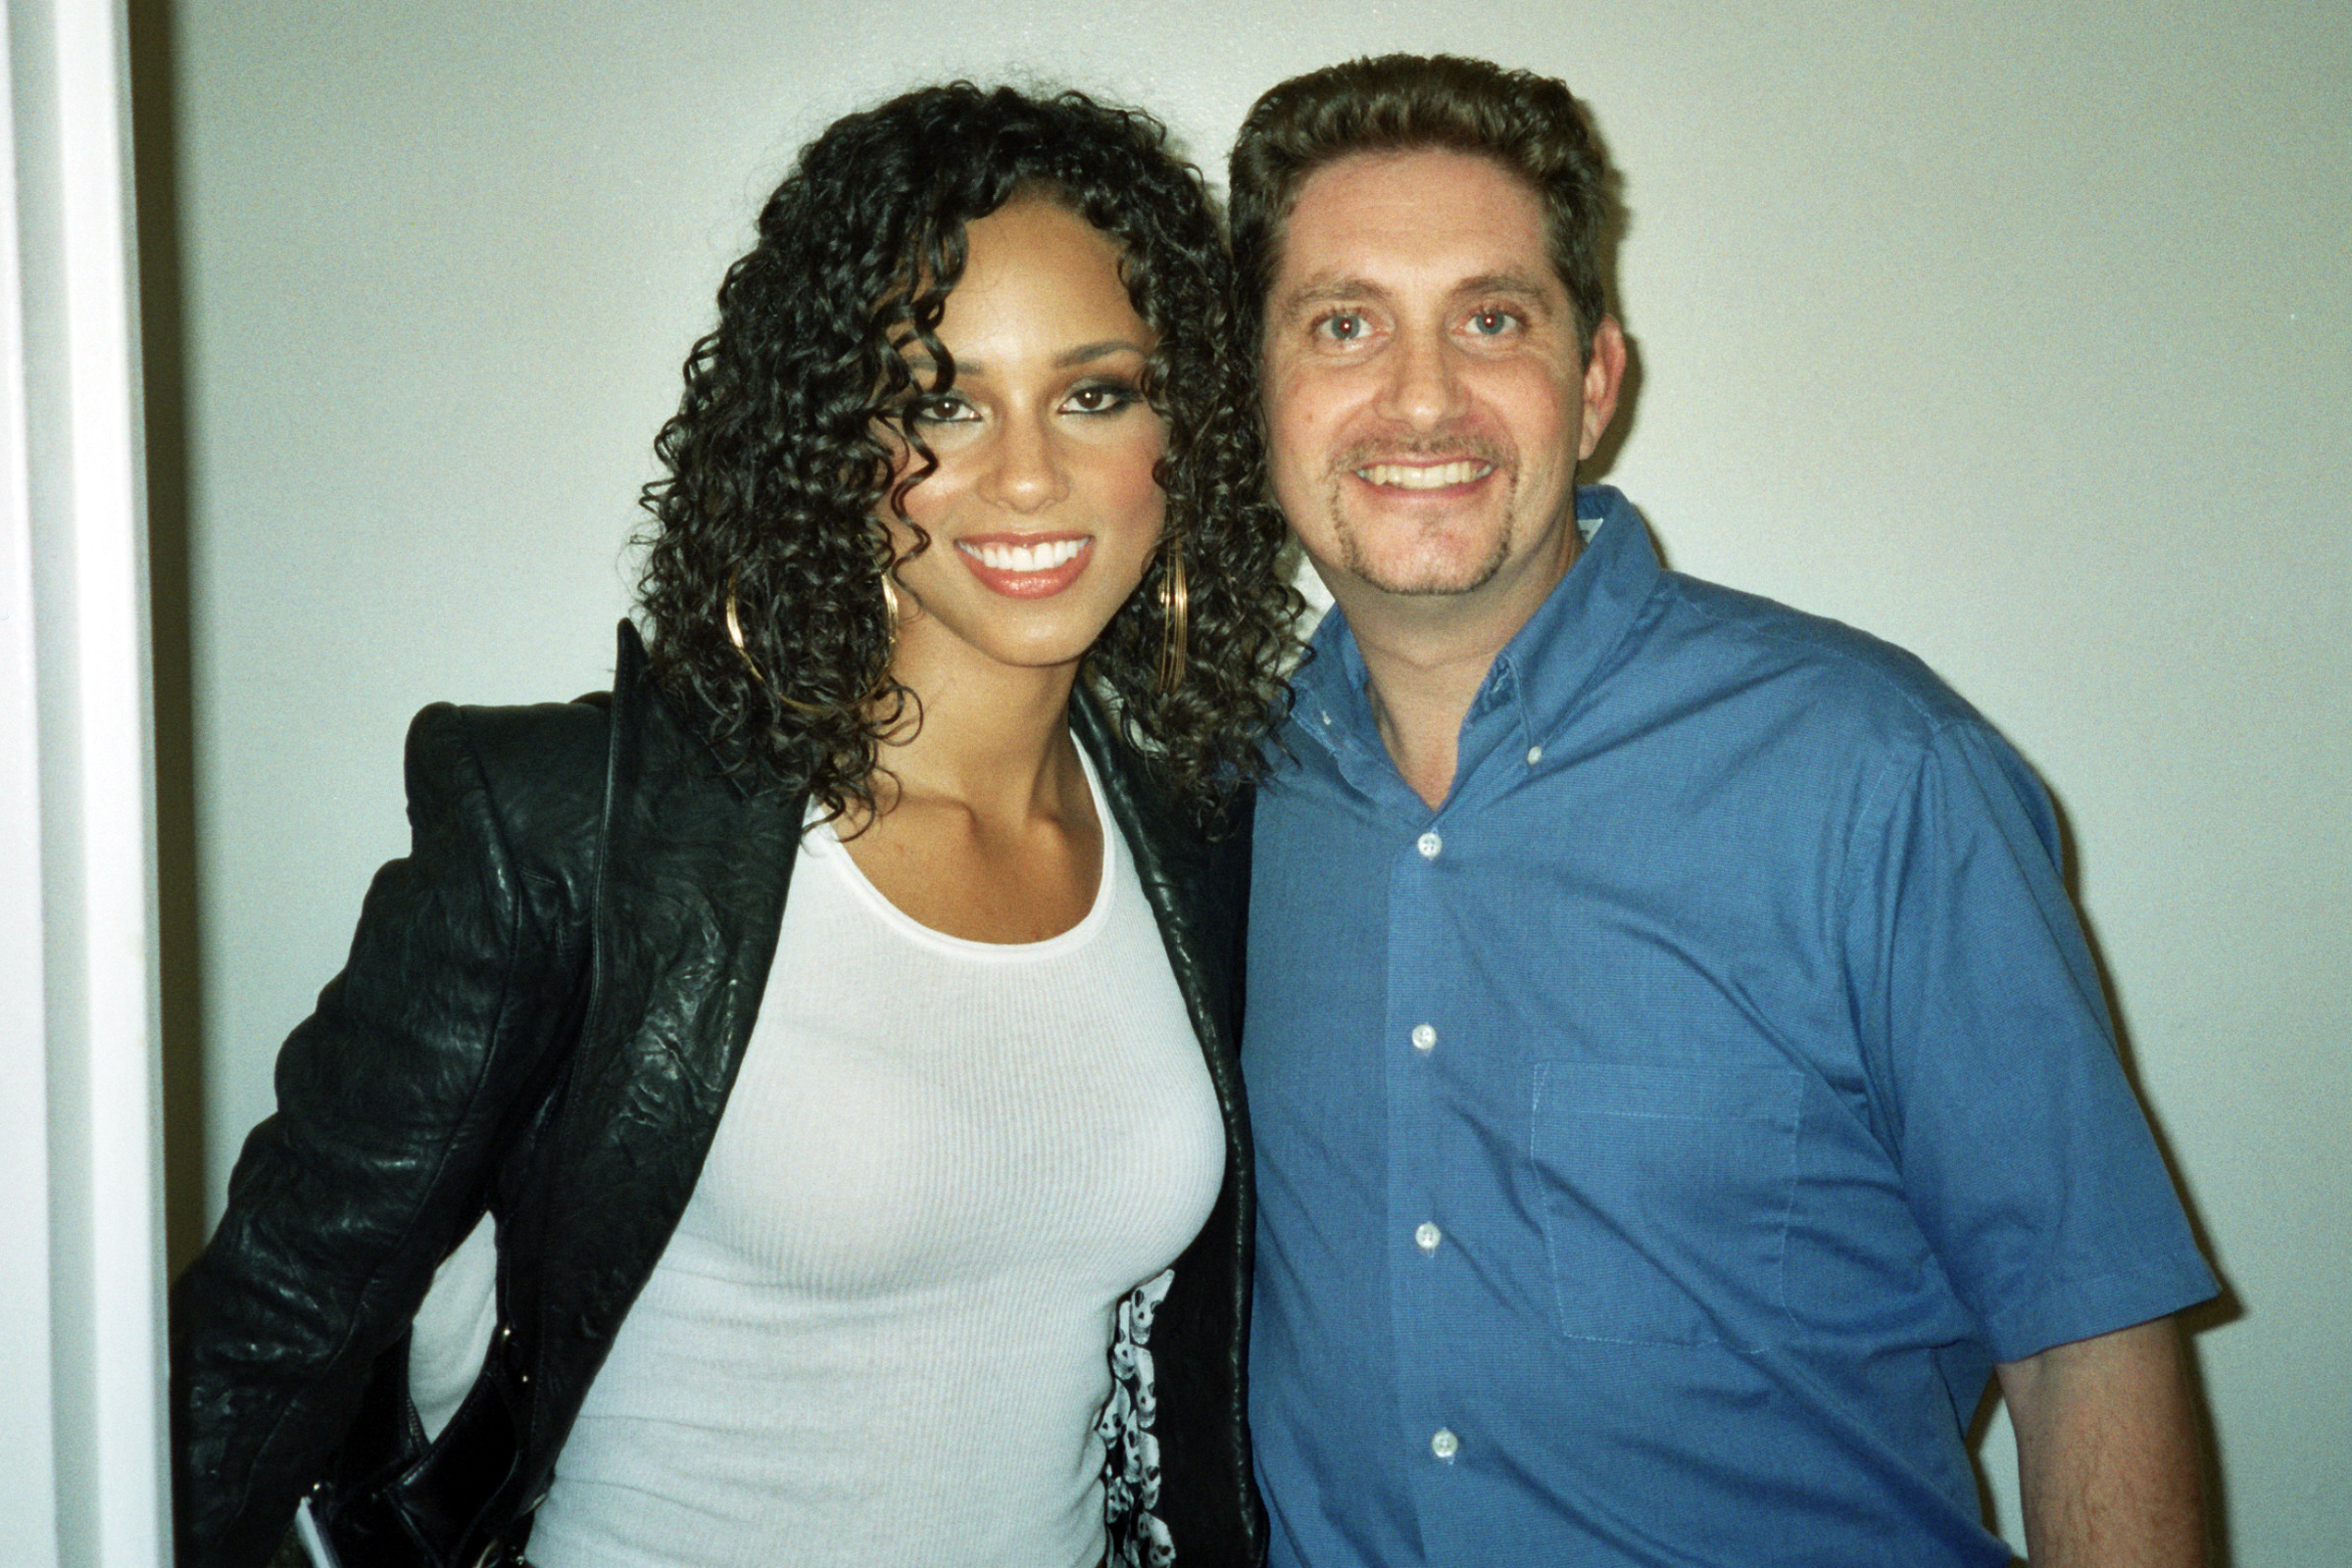 Singer Alicia Keys and Michael Christaldi backstage at The Late Show with David Letterman.